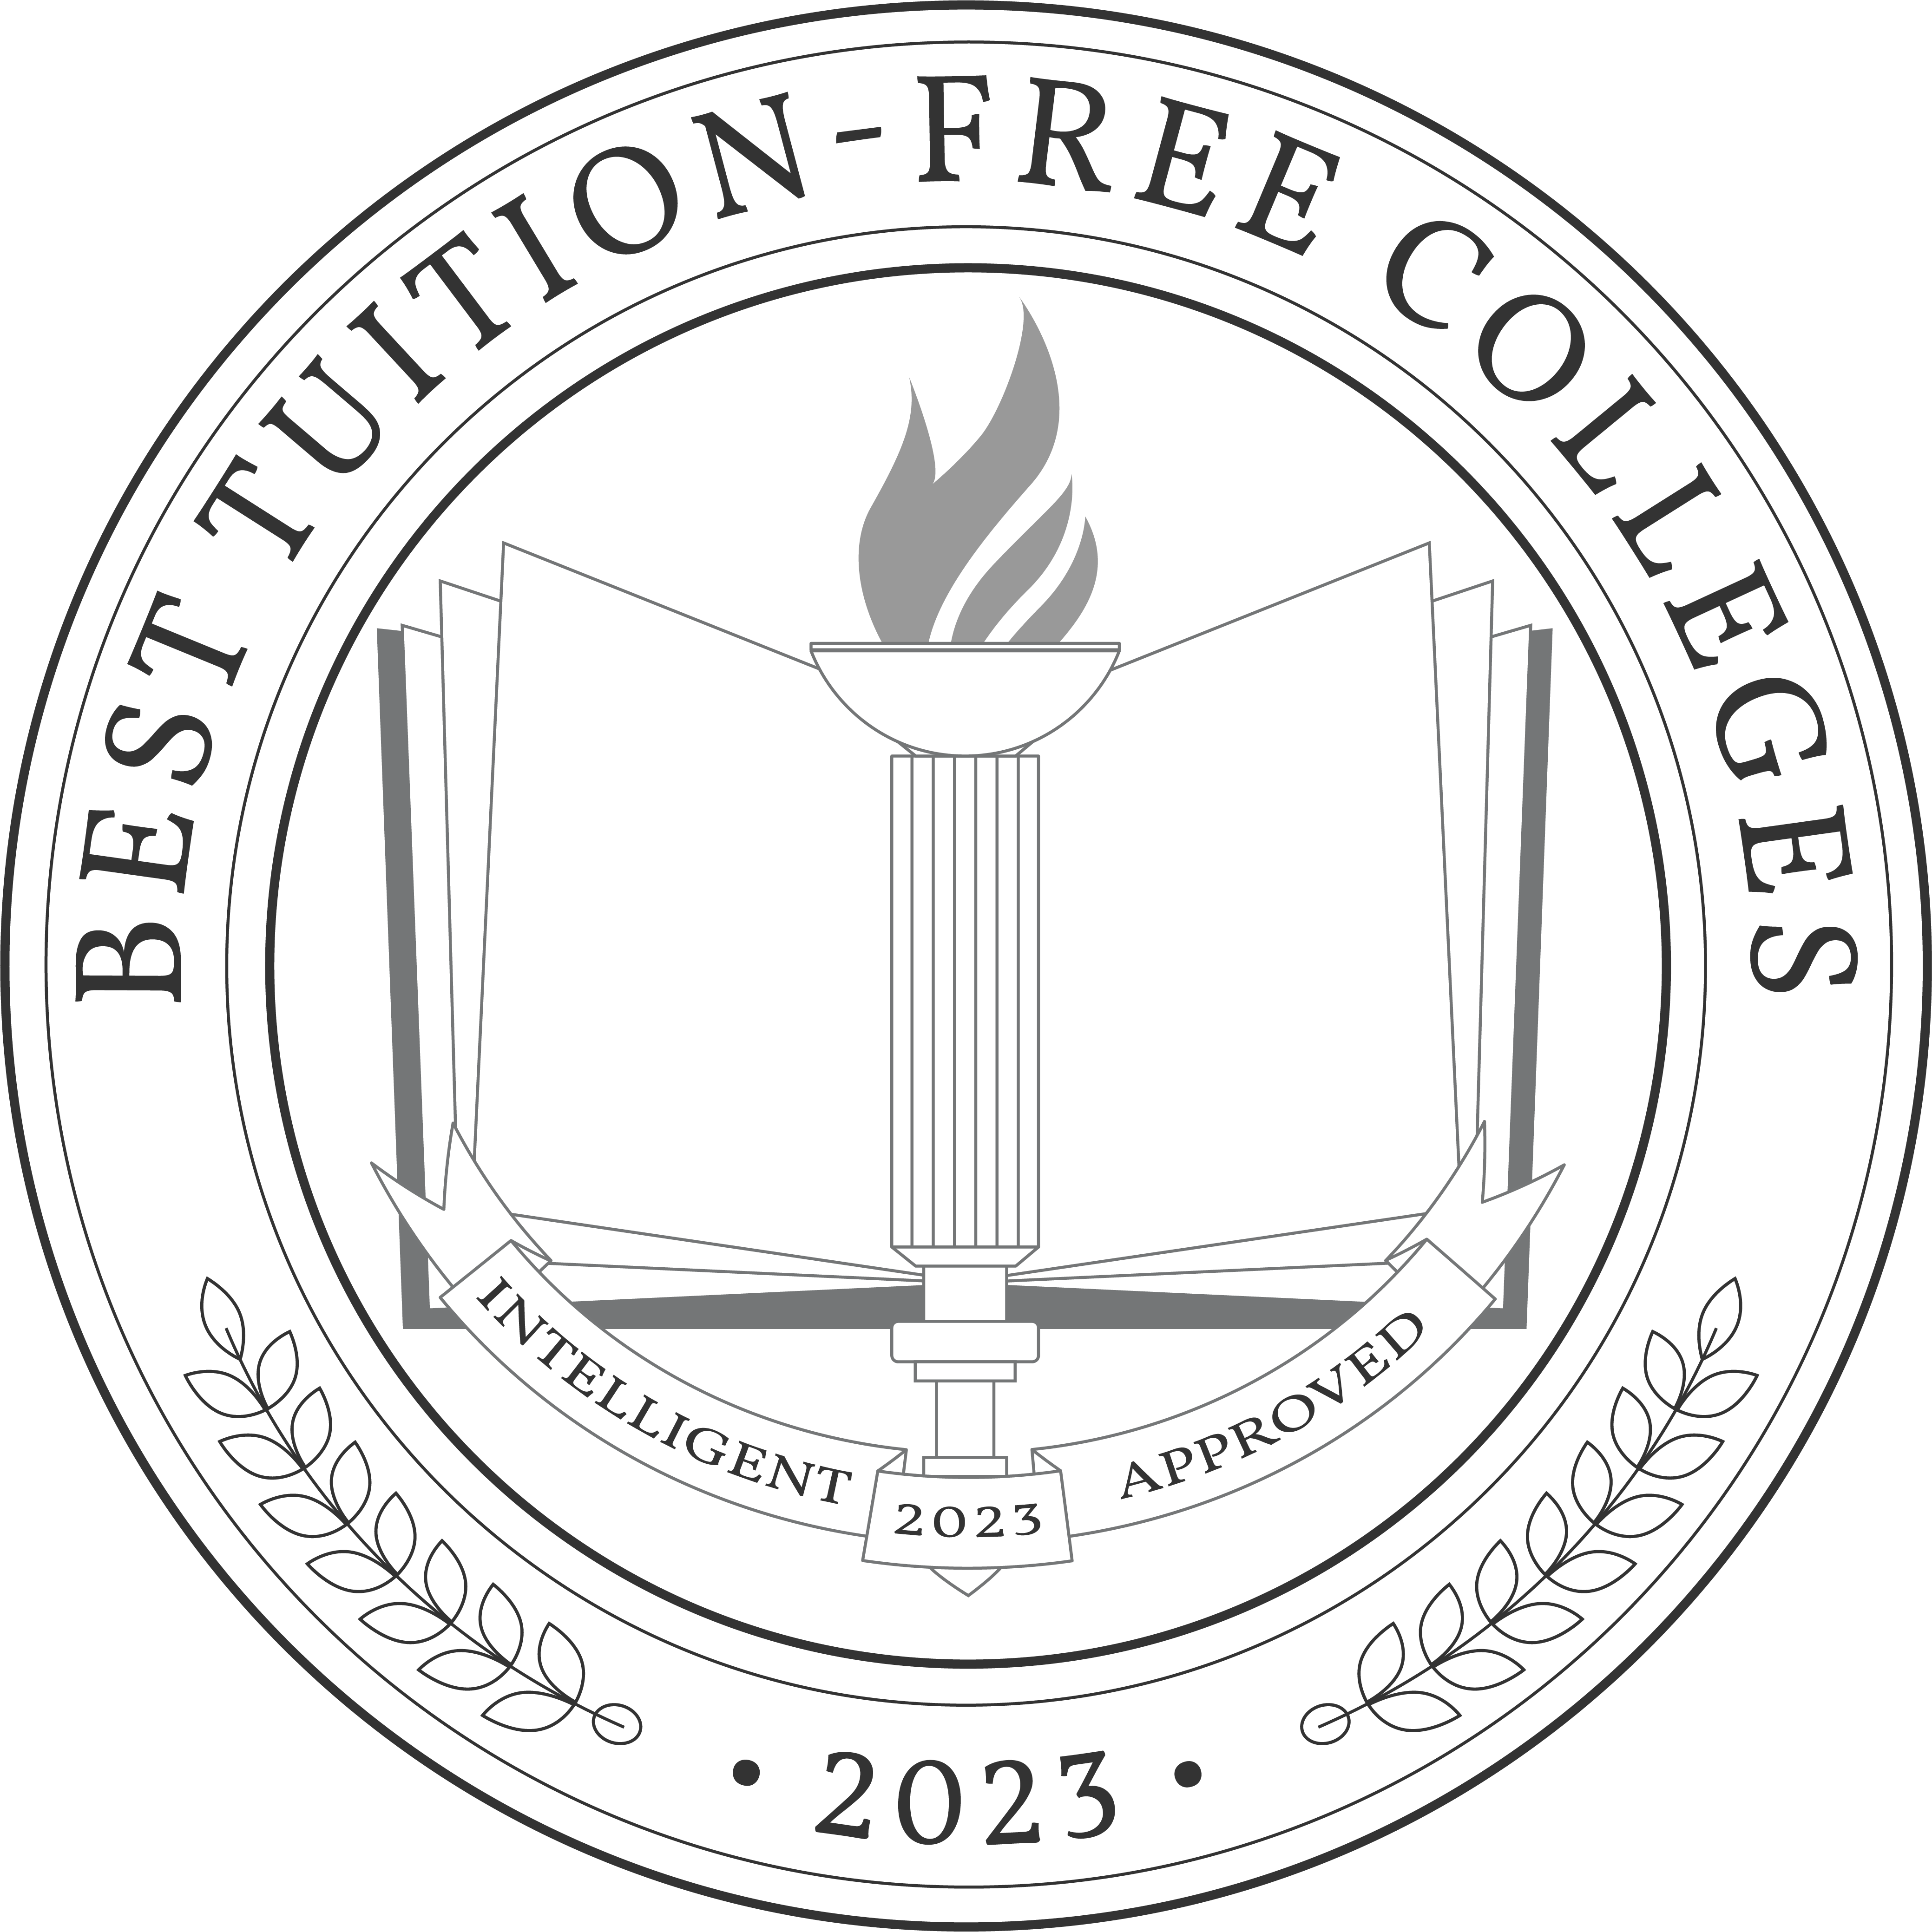 Best Tuition-Free Colleges badge